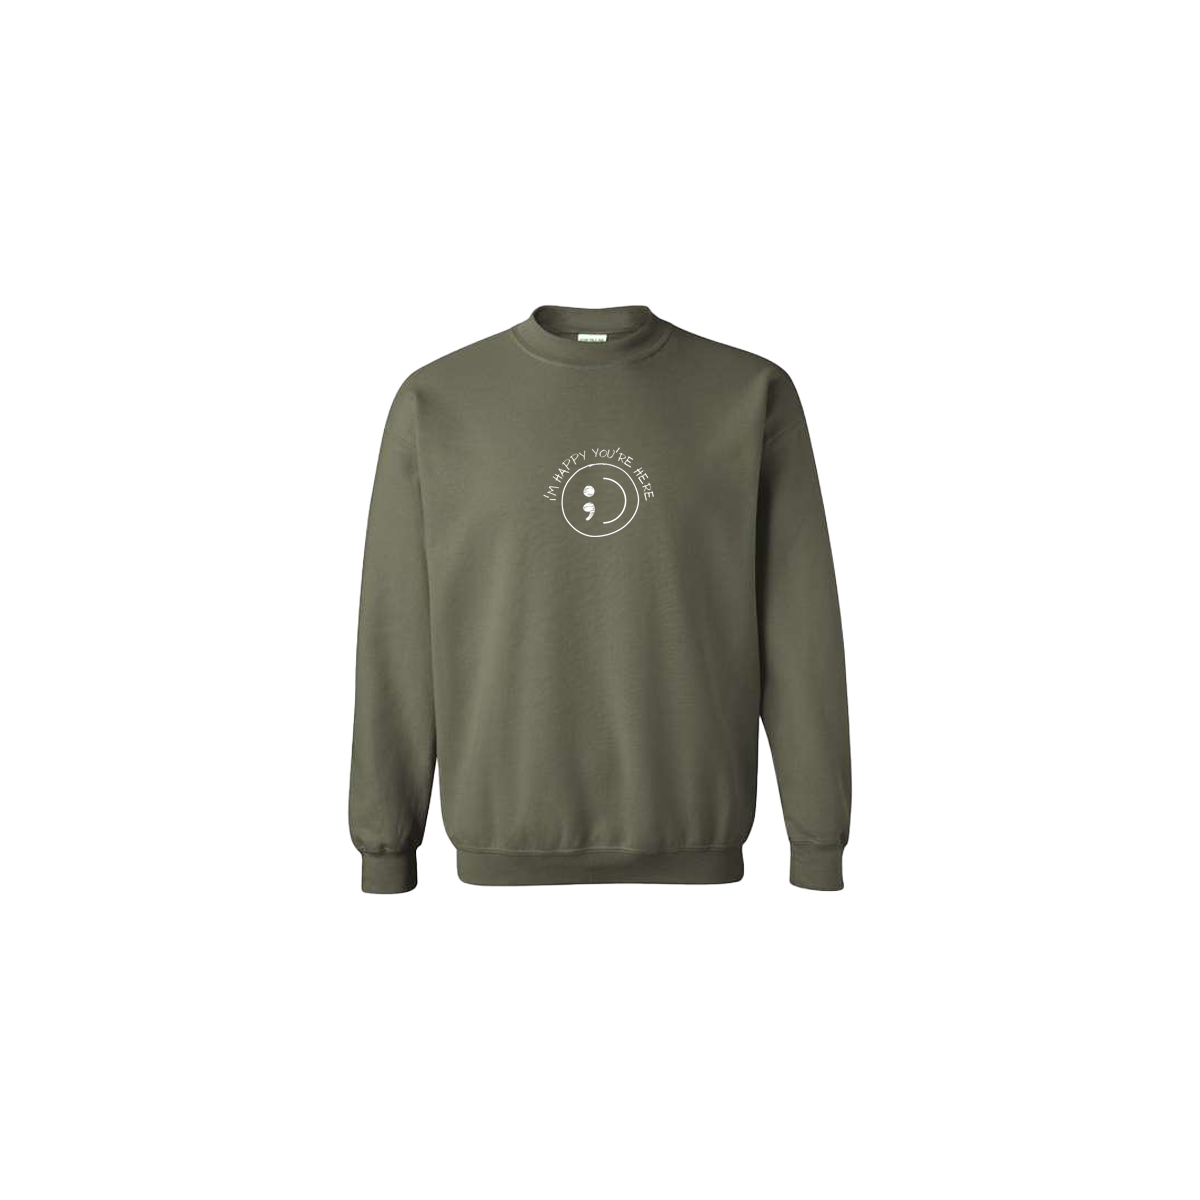 I'm Happy You're Here Embroidered ArmyGreen Crewneck - Mental Health Awareness Clothing